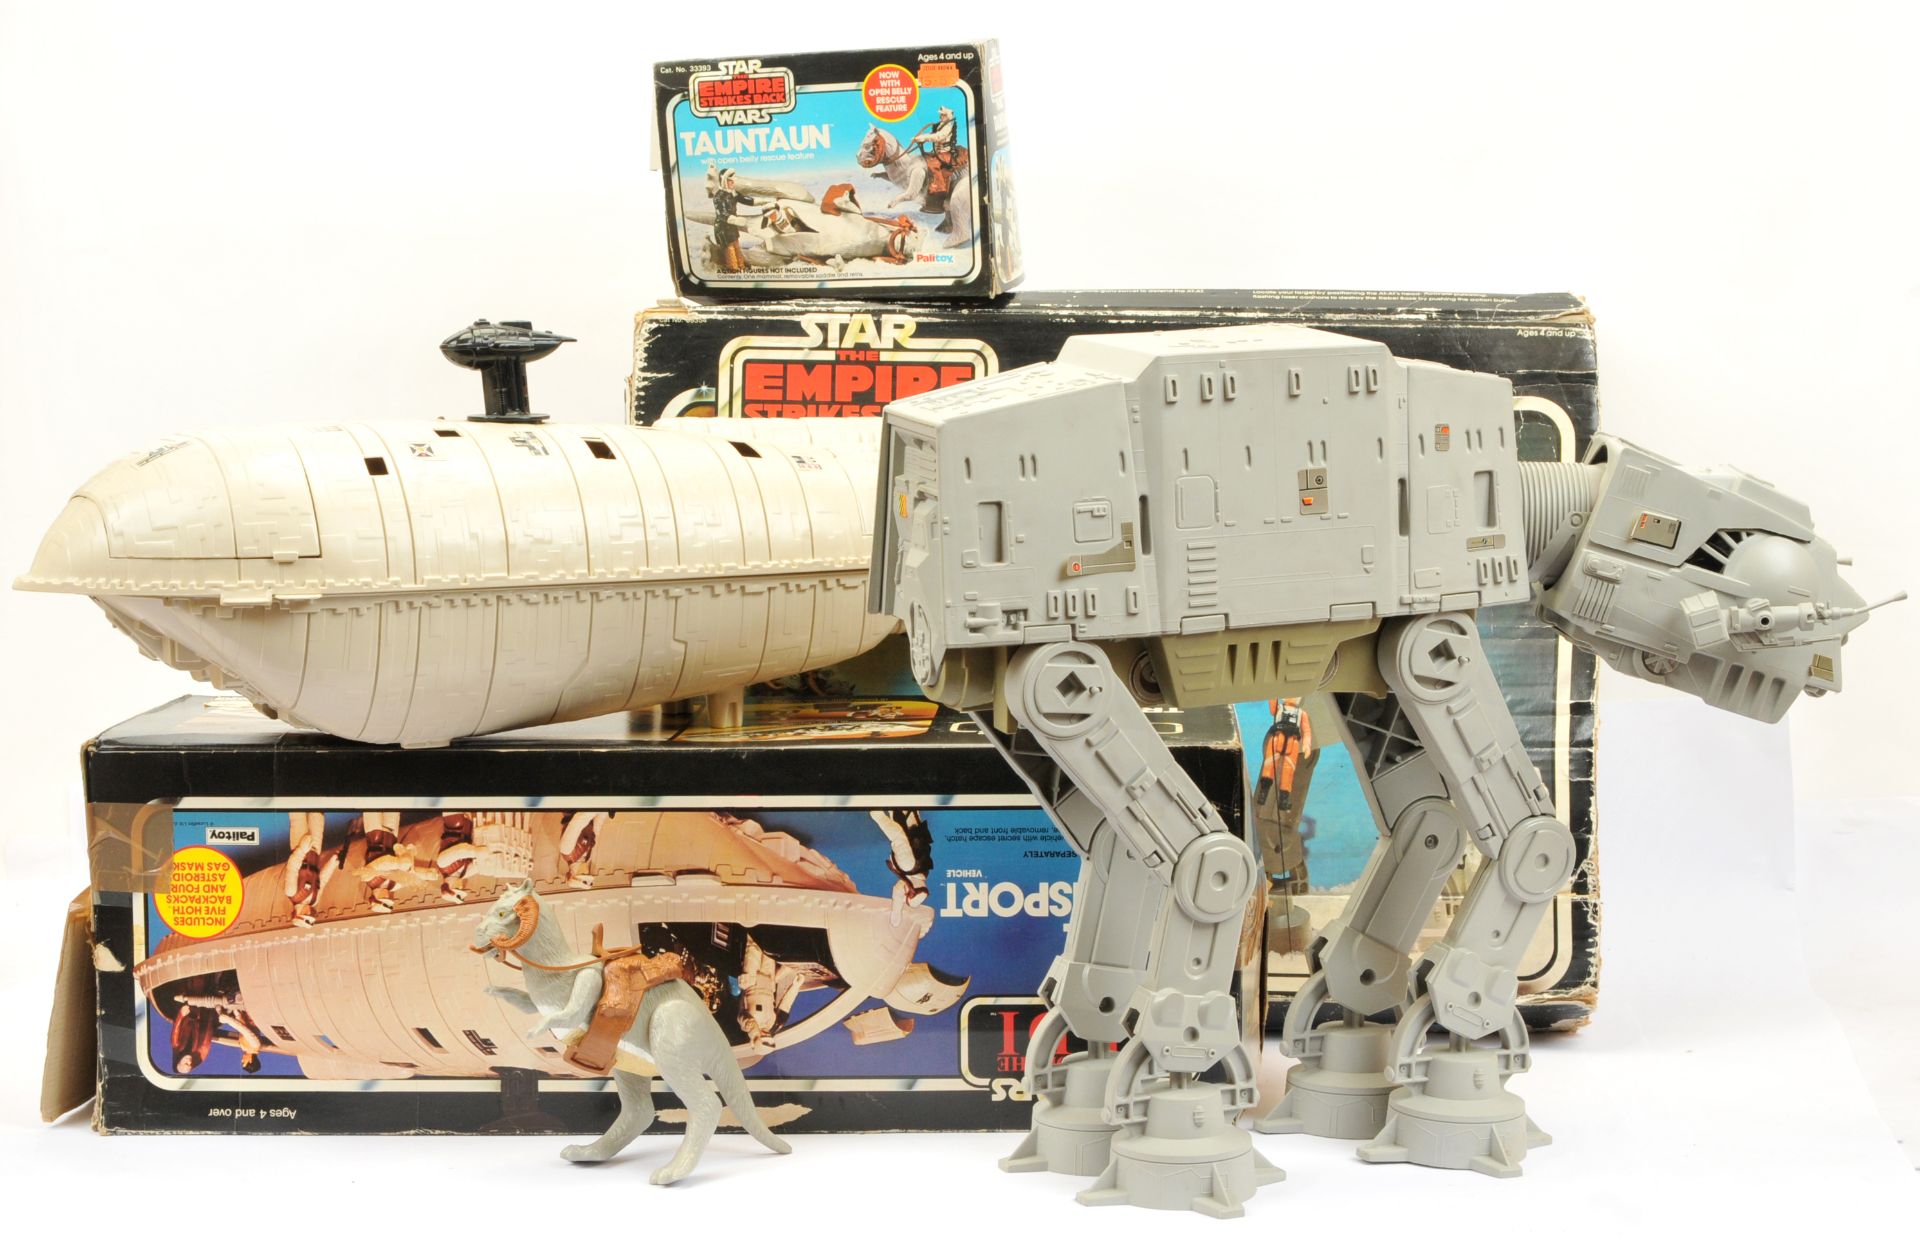 Palitoy Star Wars vintage vehicles and creatures x 3 - Image 2 of 3